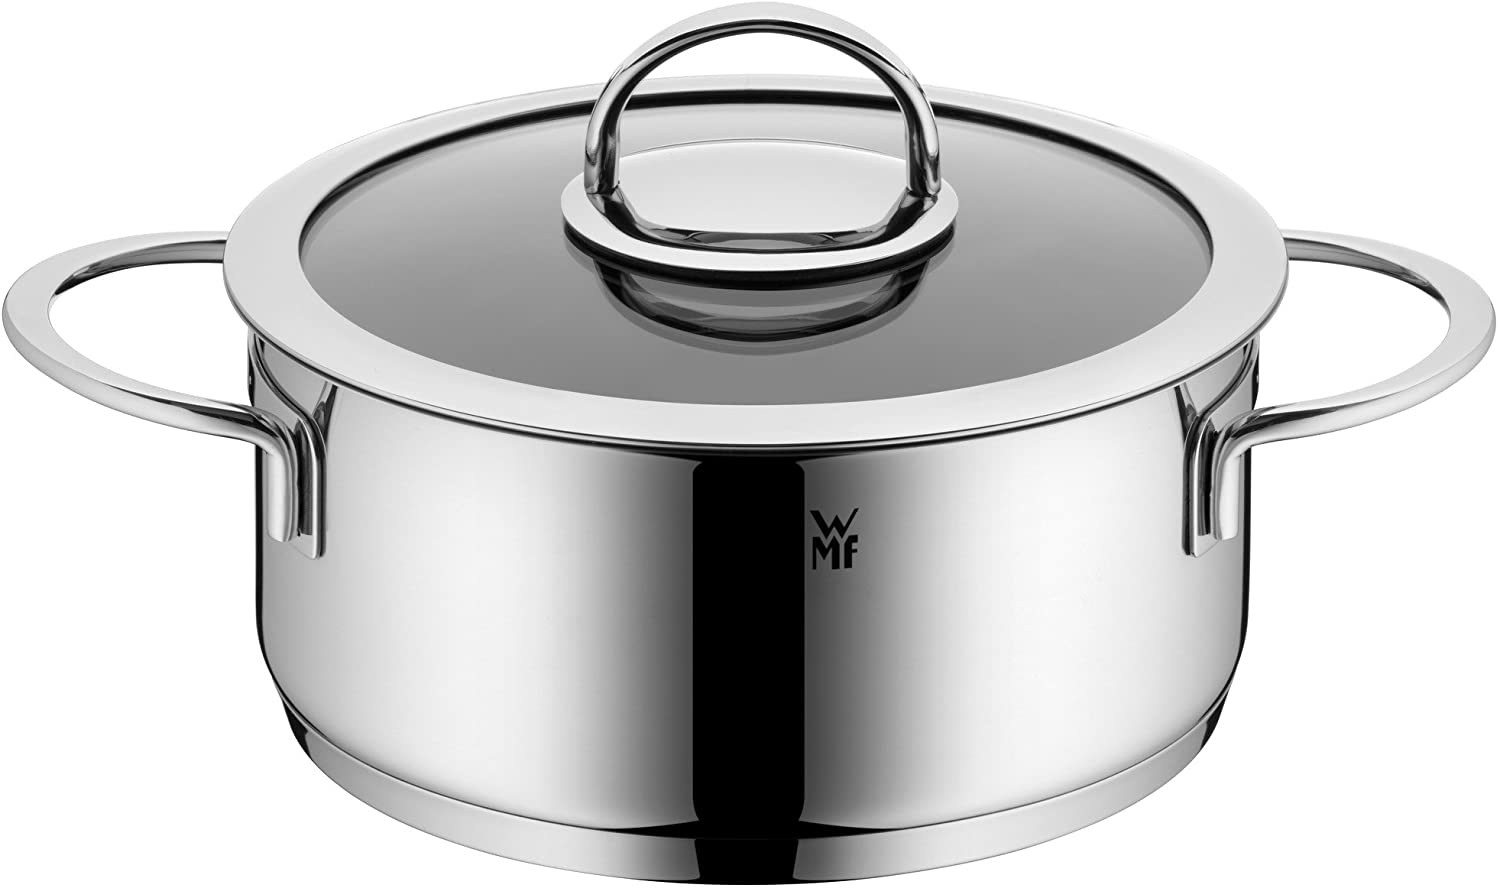 WMF Vignola Saucepan 20 cm Glass Lid Stewing Pot 2.5 L Cromargan Polished Stainless Steel Coated Induction Pot